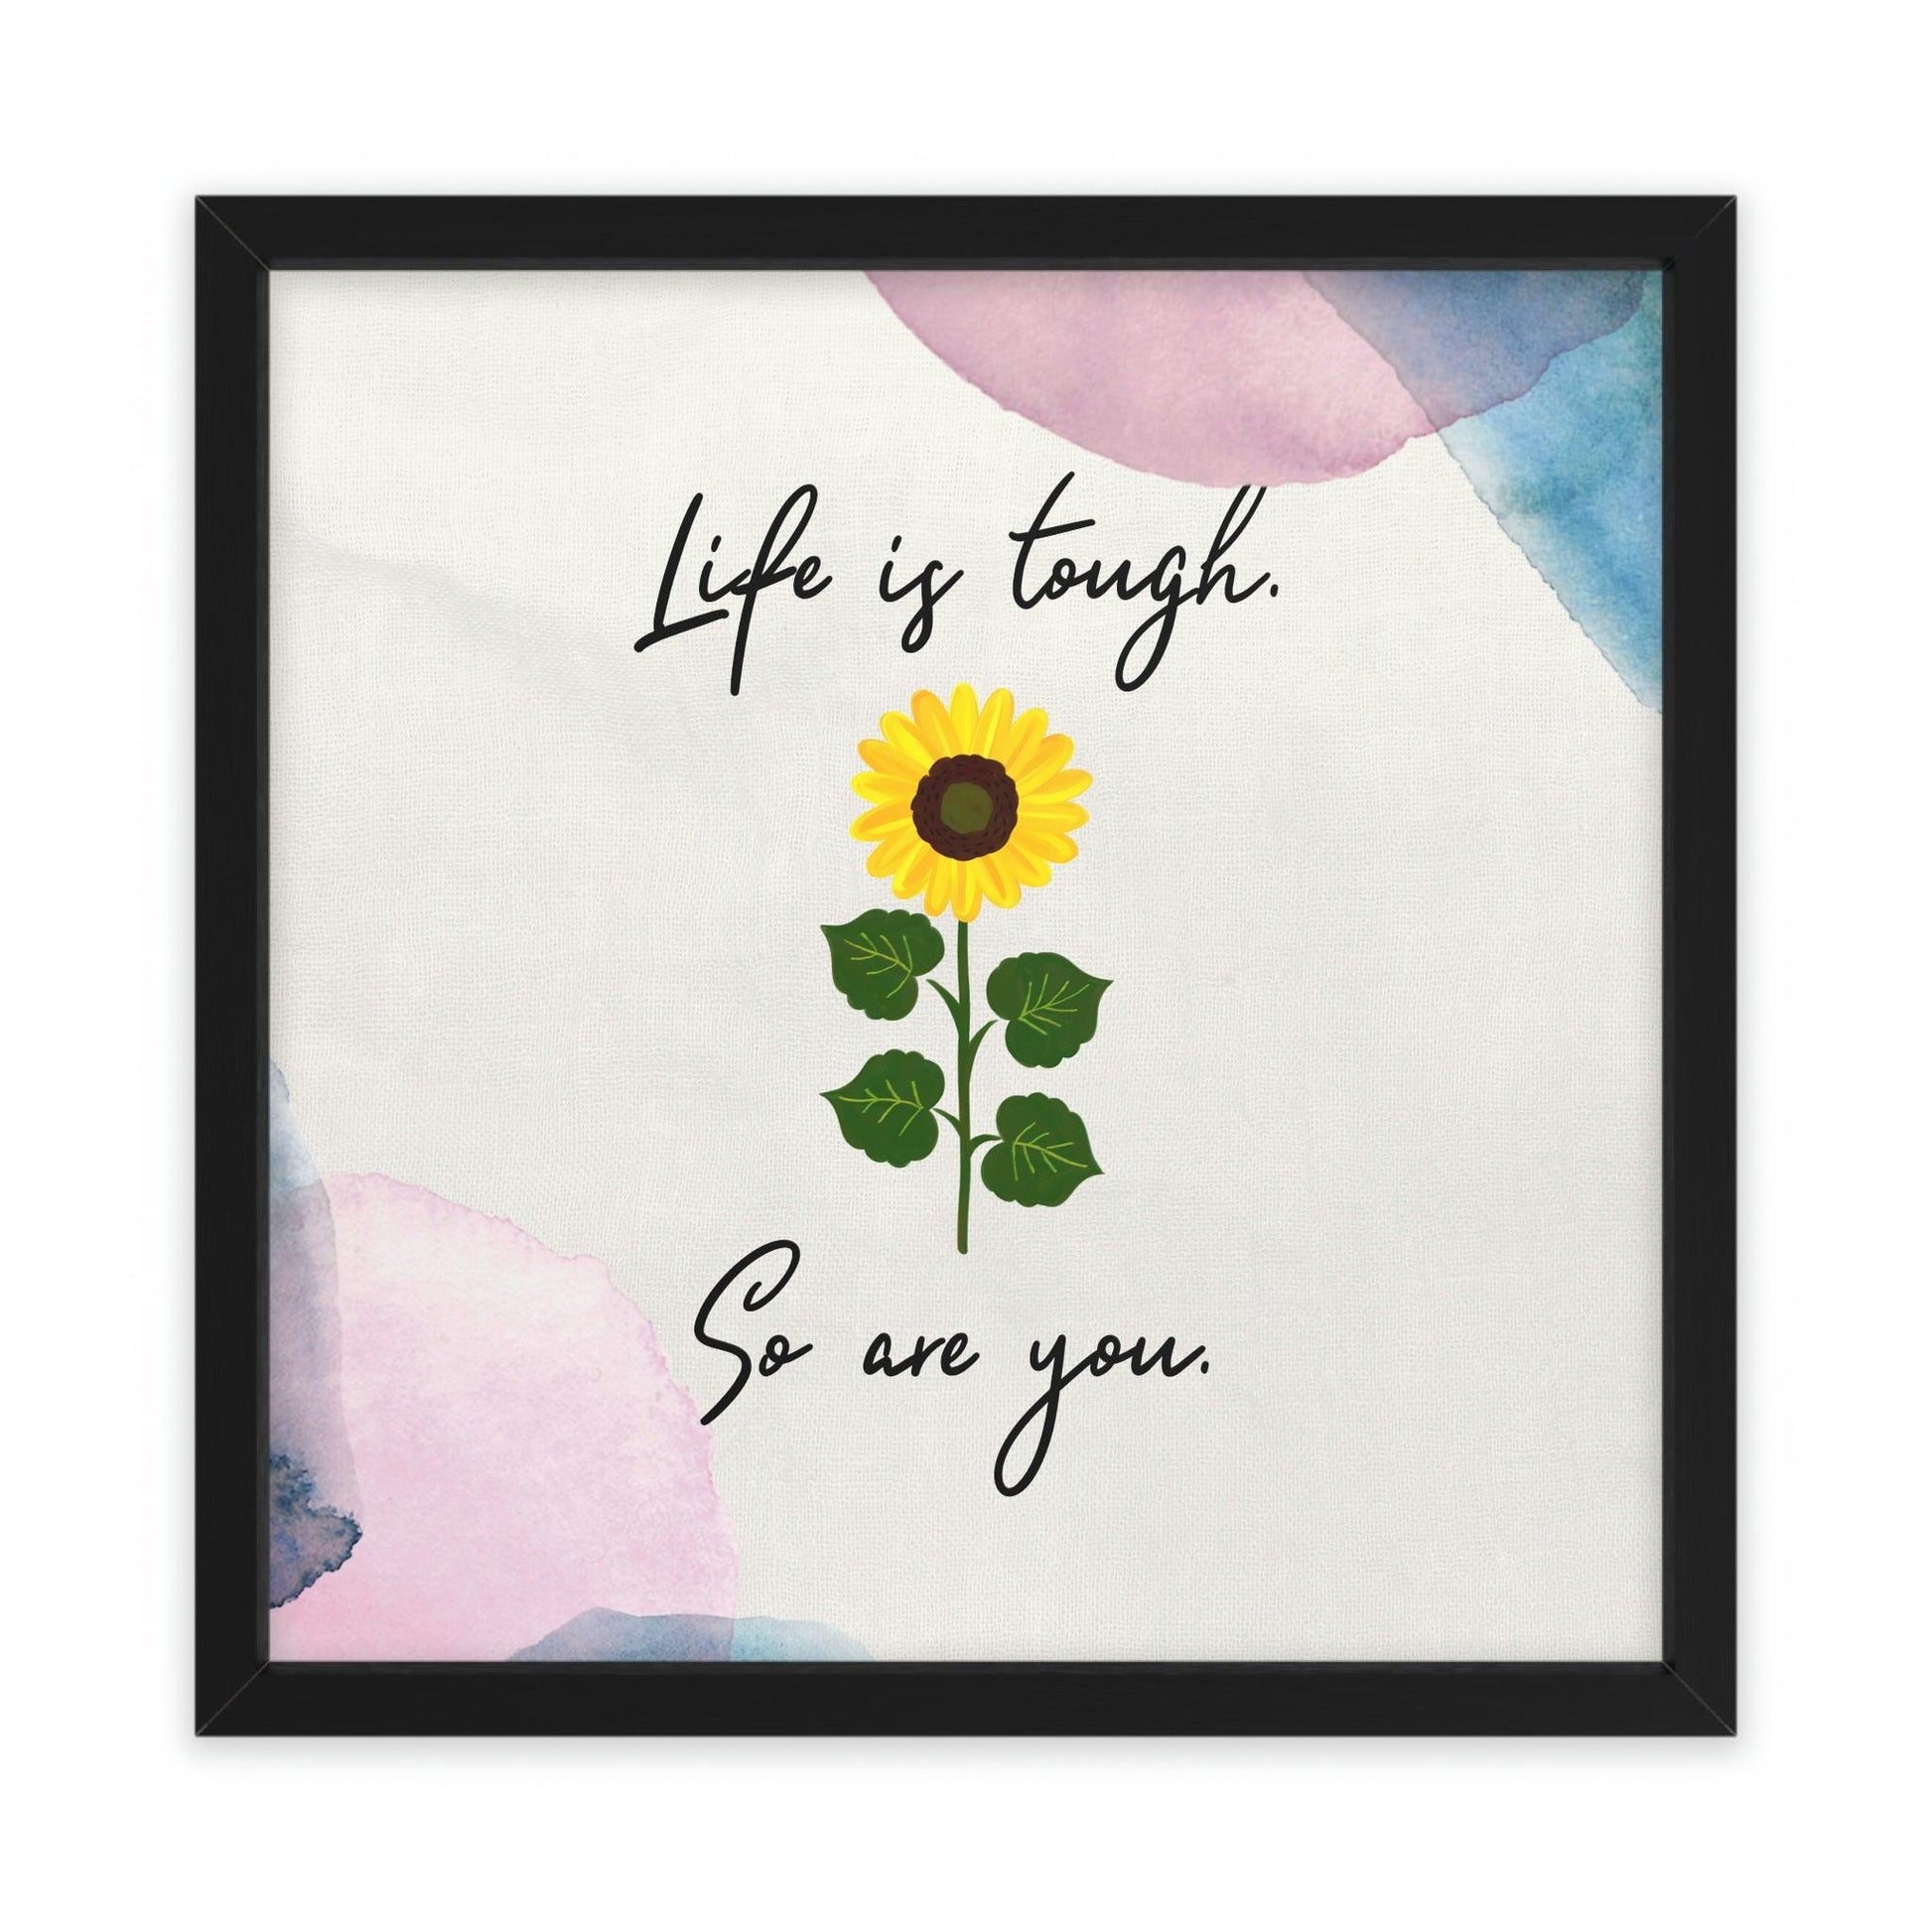 Life is tough. So are you Framed Poster Wall Art - MAIA HOMES